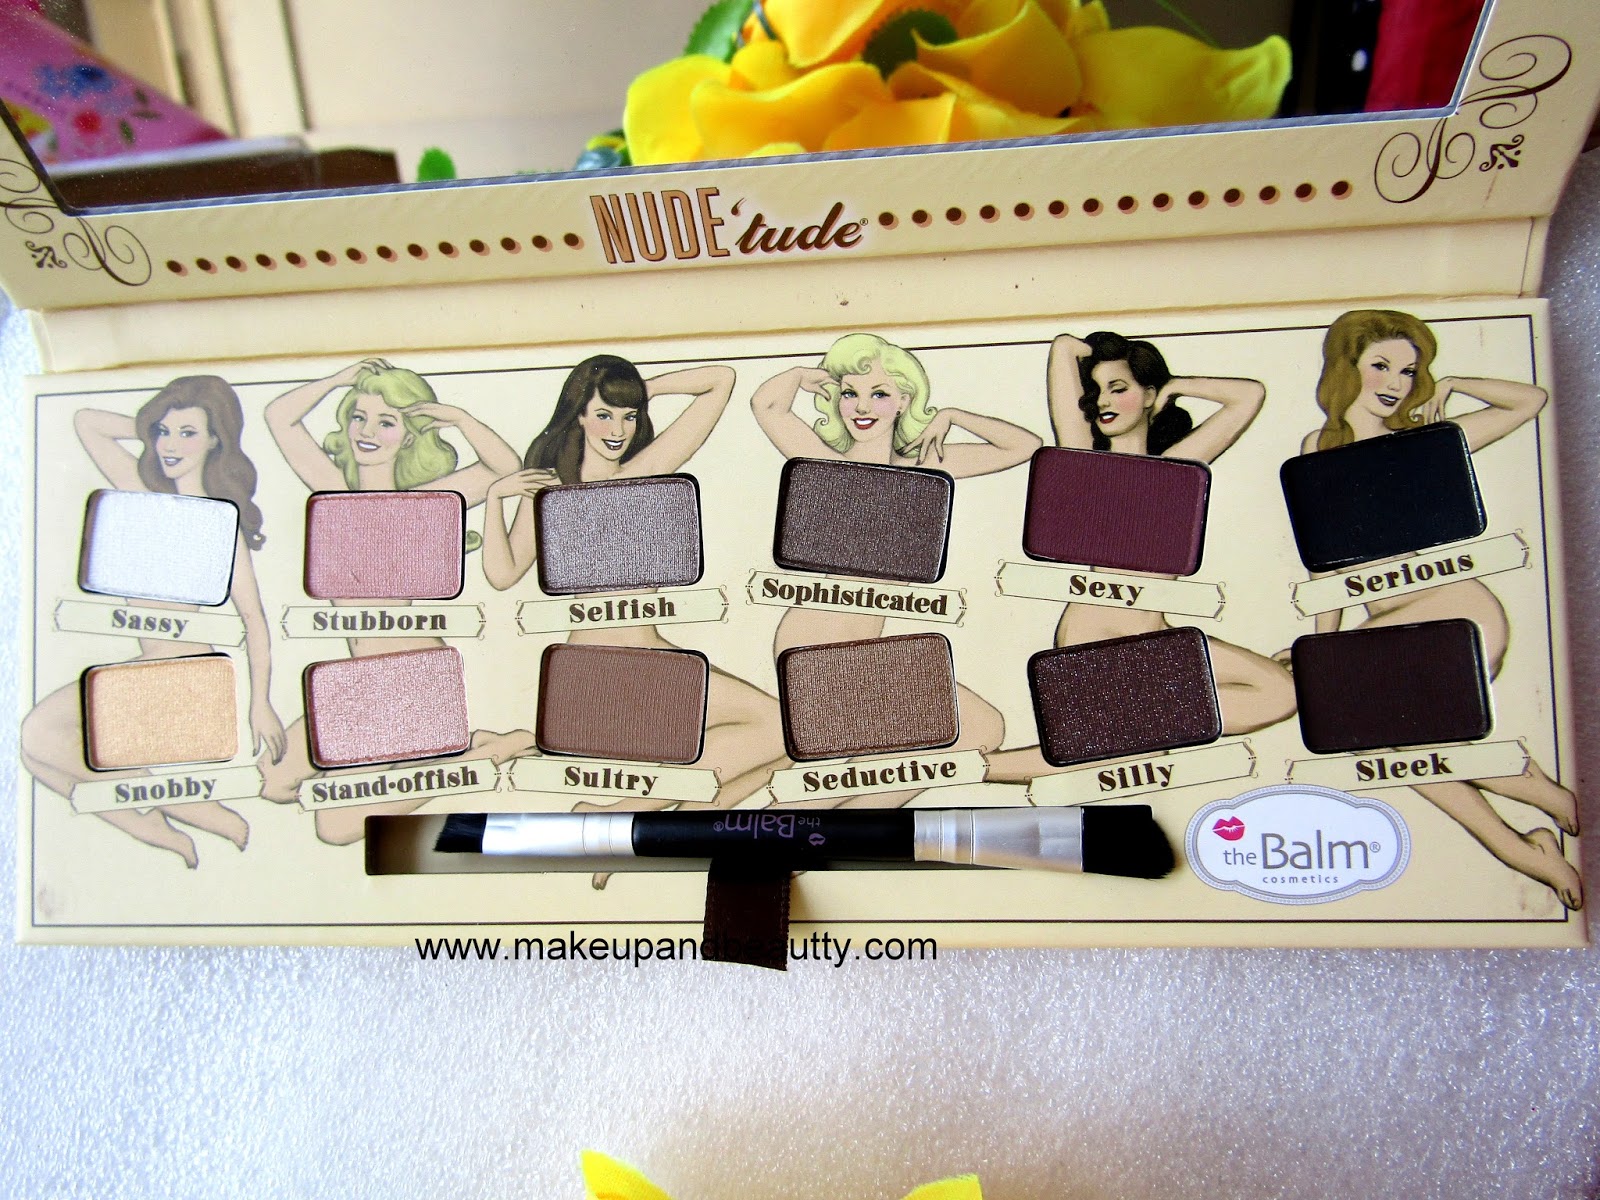 Makeup And Beauty Review And Swatches Of Thebalm Nude Tude